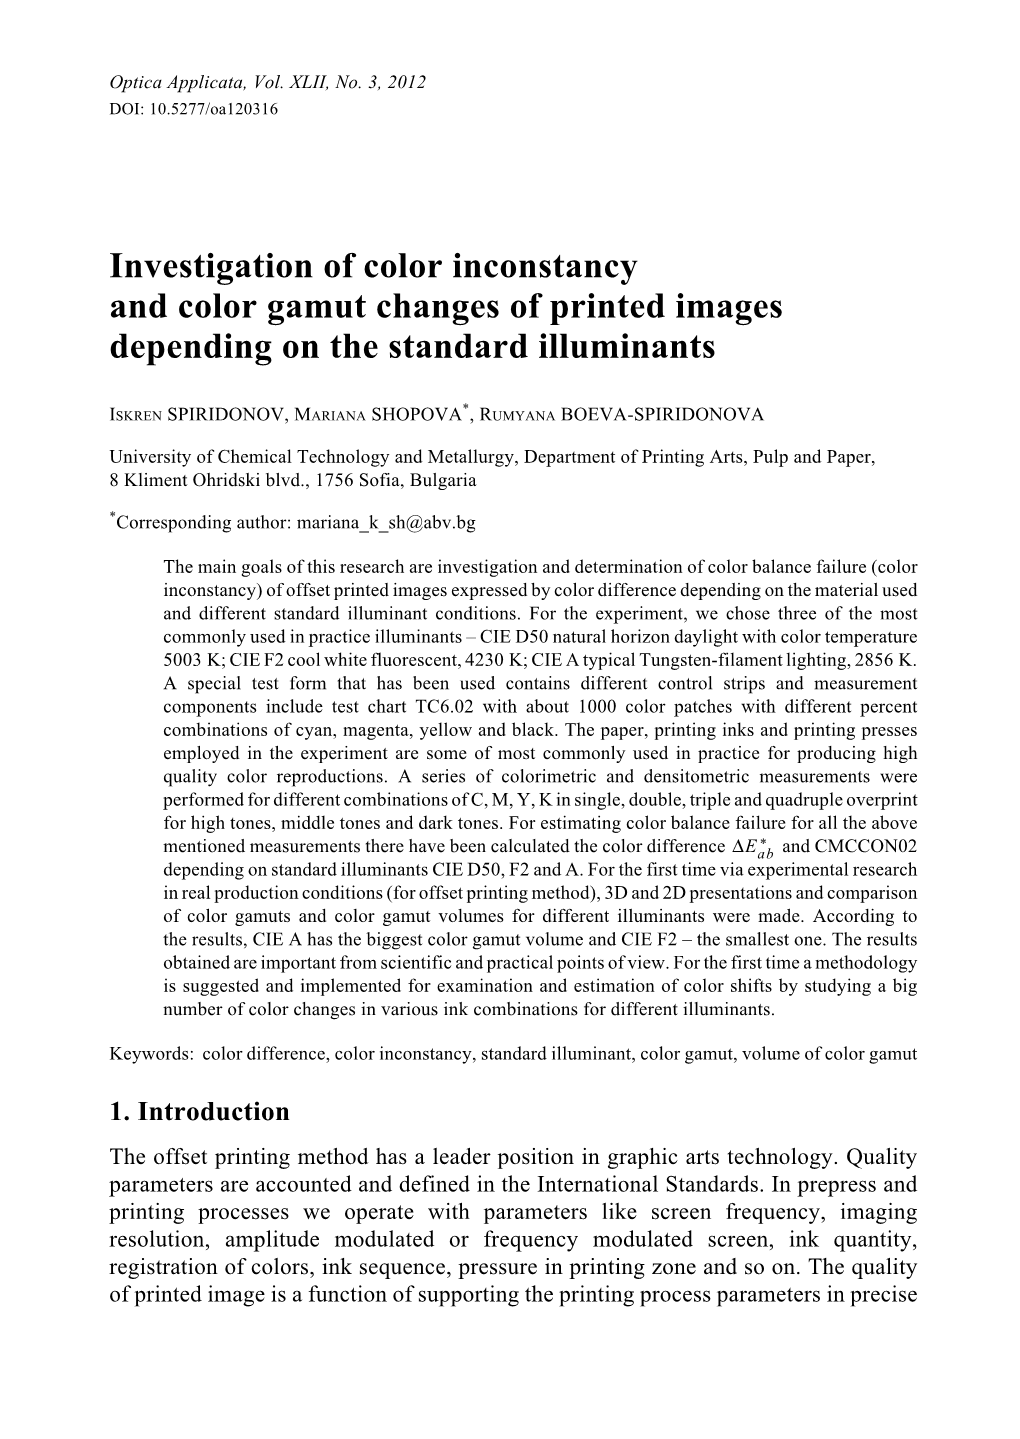 Investigation of Color Inconstancy and Color Gamut Changes of Printed Images Depending on the Standard Illuminants